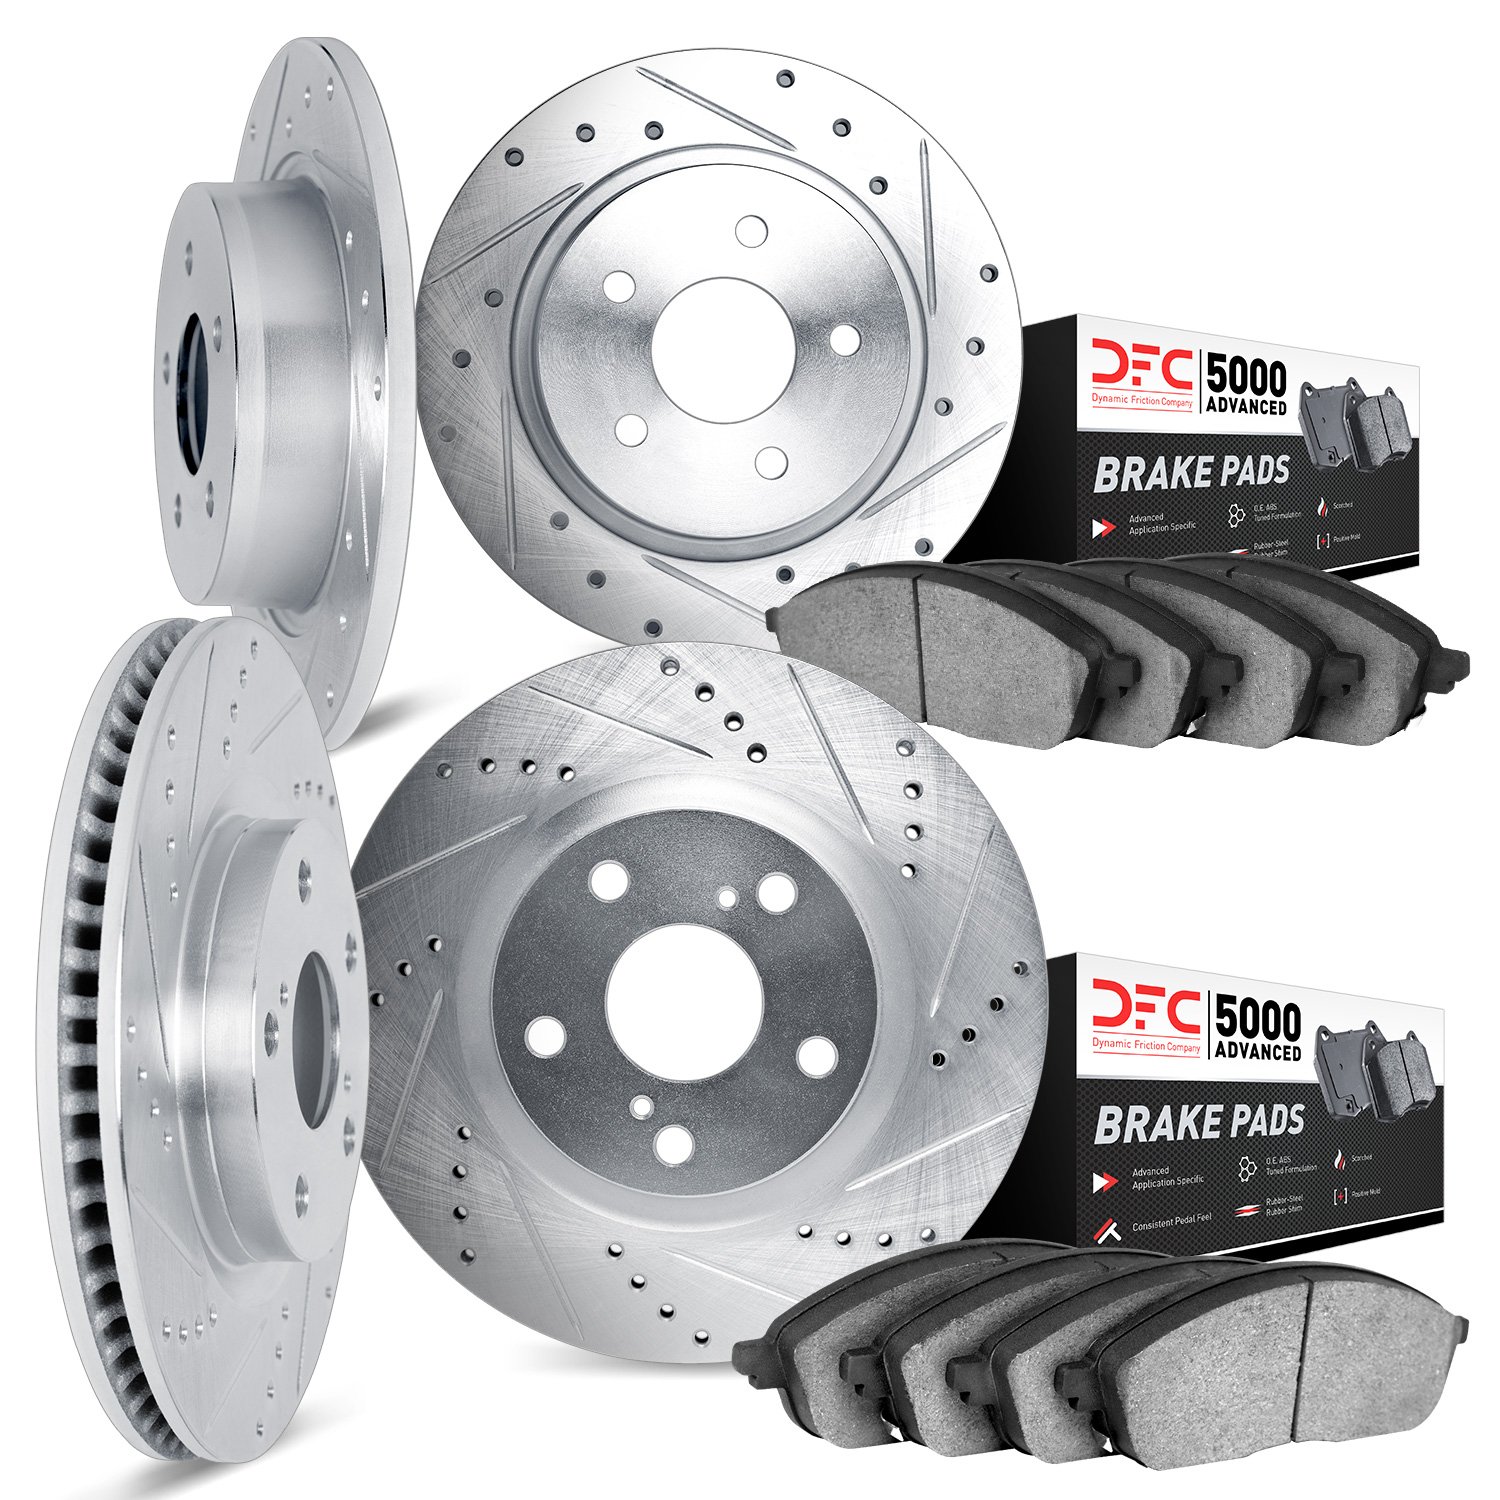 7504-54292 Drilled/Slotted Brake Rotors w/5000 Advanced Brake Pads Kit [Silver], 2013-2020 Ford/Lincoln/Mercury/Mazda, Position: